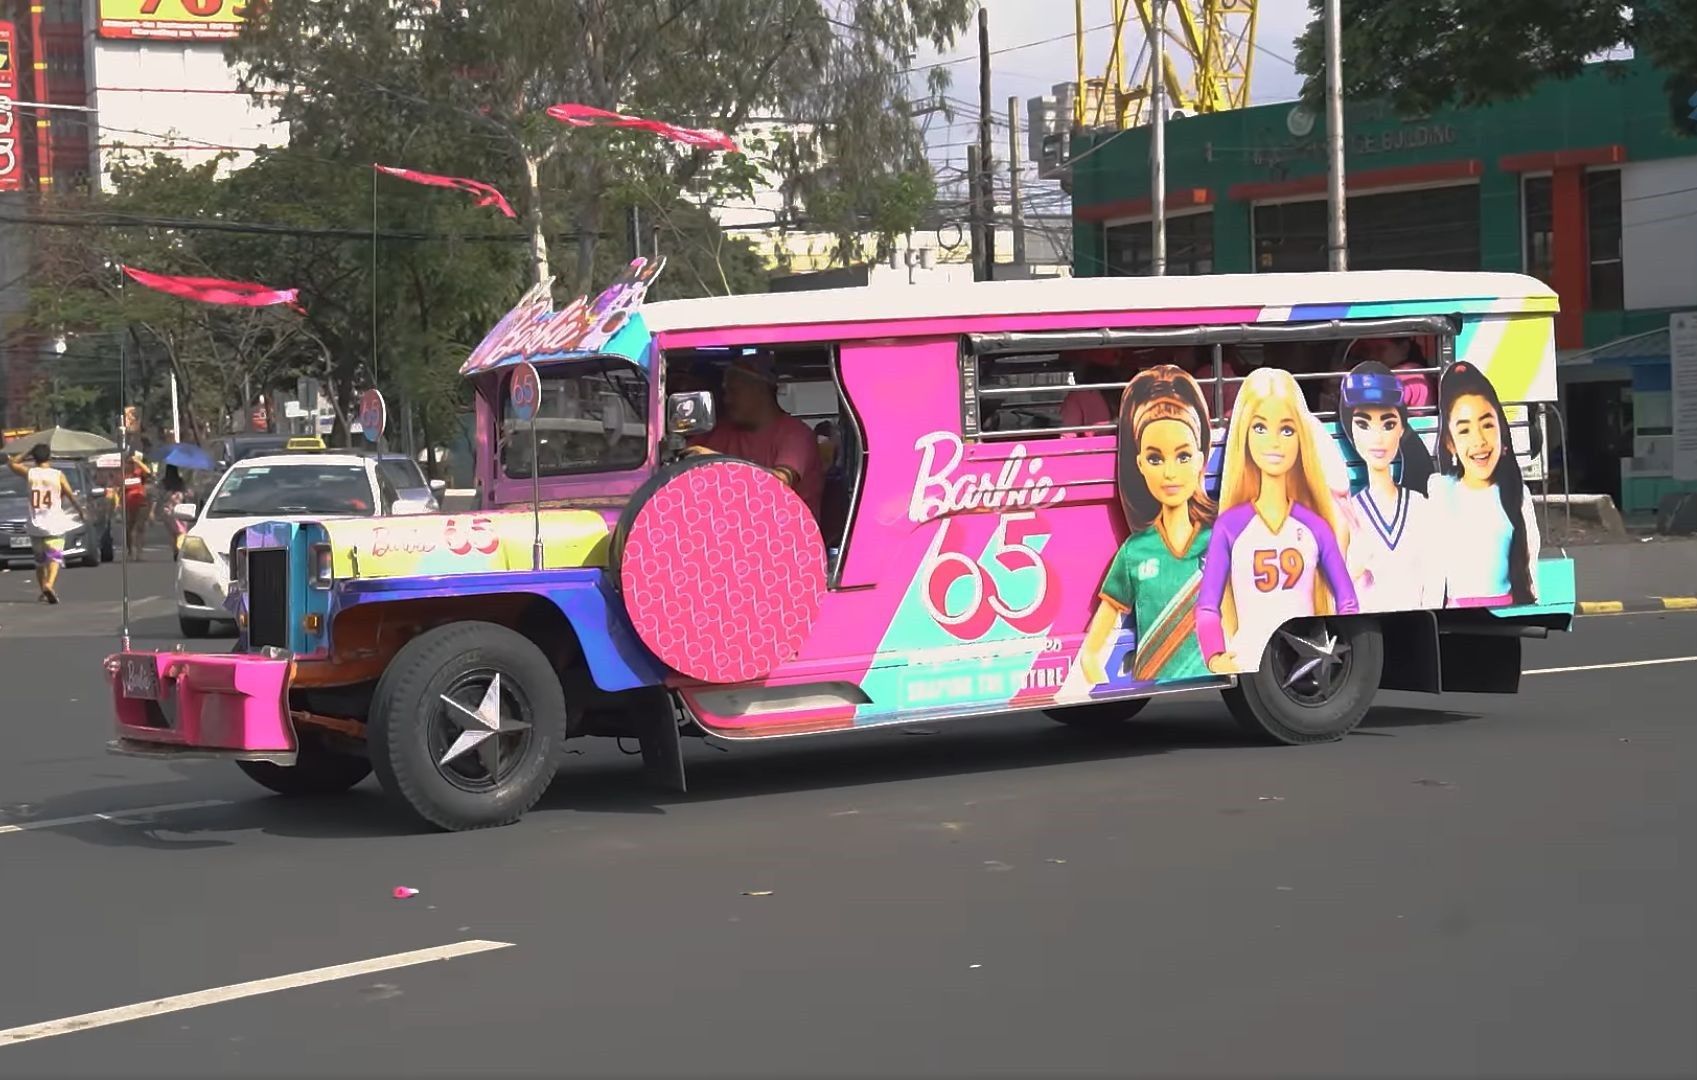 'Barbie jeepney' celebrates doll's 65th anniversary with citywide donations